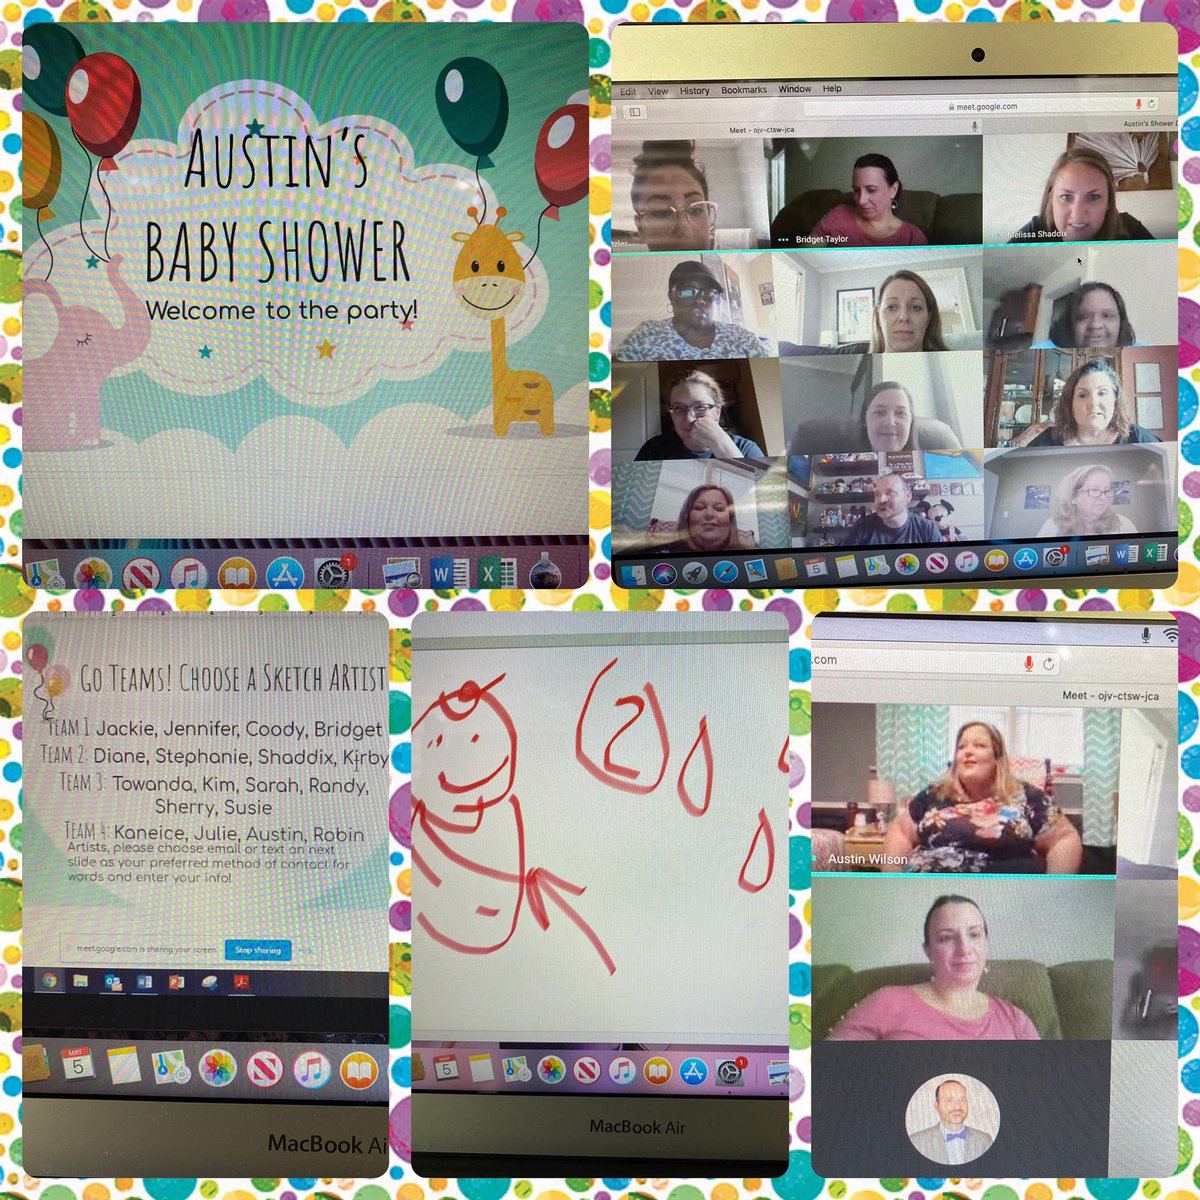 The laughs, smiles, and happy faces were so refreshing! Congratulations @ACWilsonTeaches! @LeahWetzler is such an awesome game show host! I ❤️ this team! #VirtualBabyShower #ConnectivityMatters @klbsci